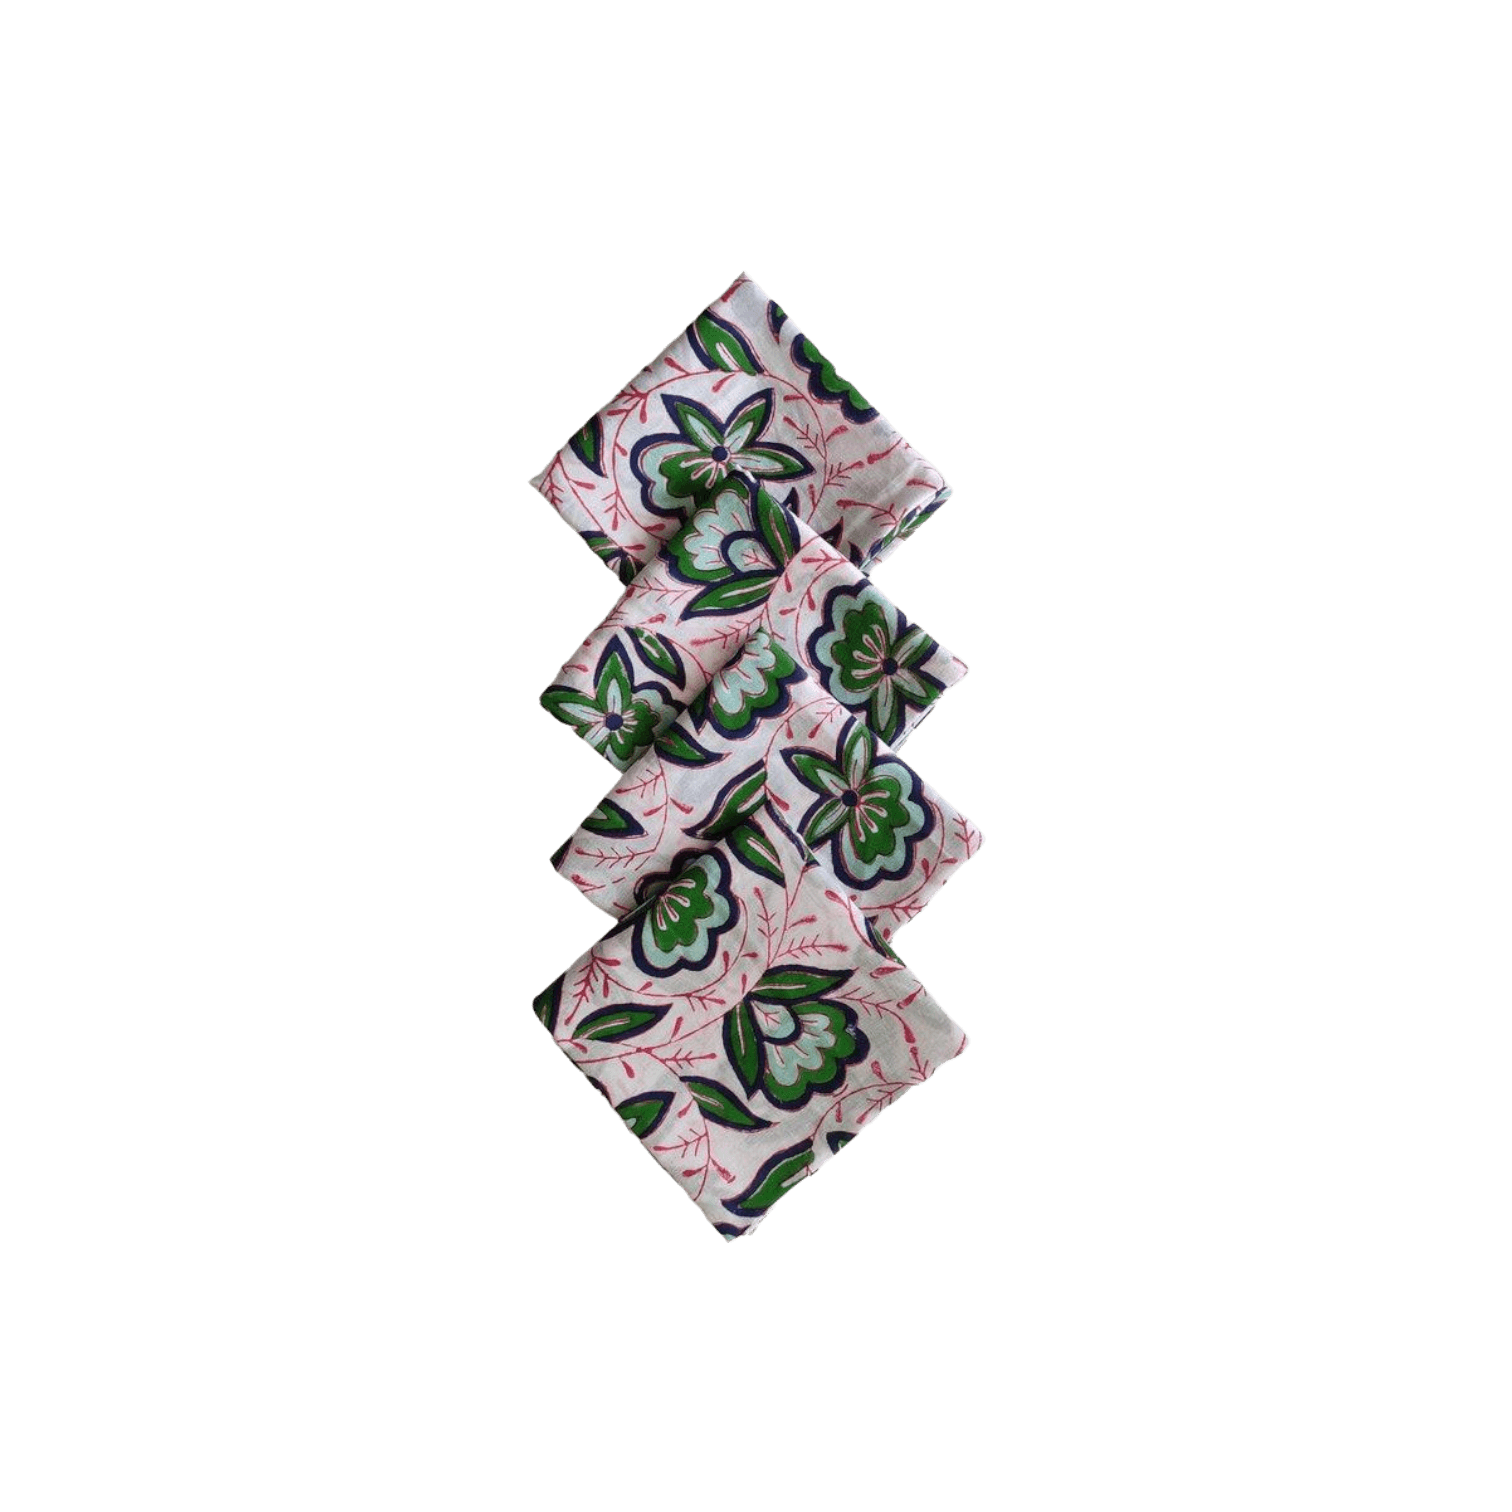 Pink and Green Floral Block Printed Cotton Napkins - MAIA HOMES